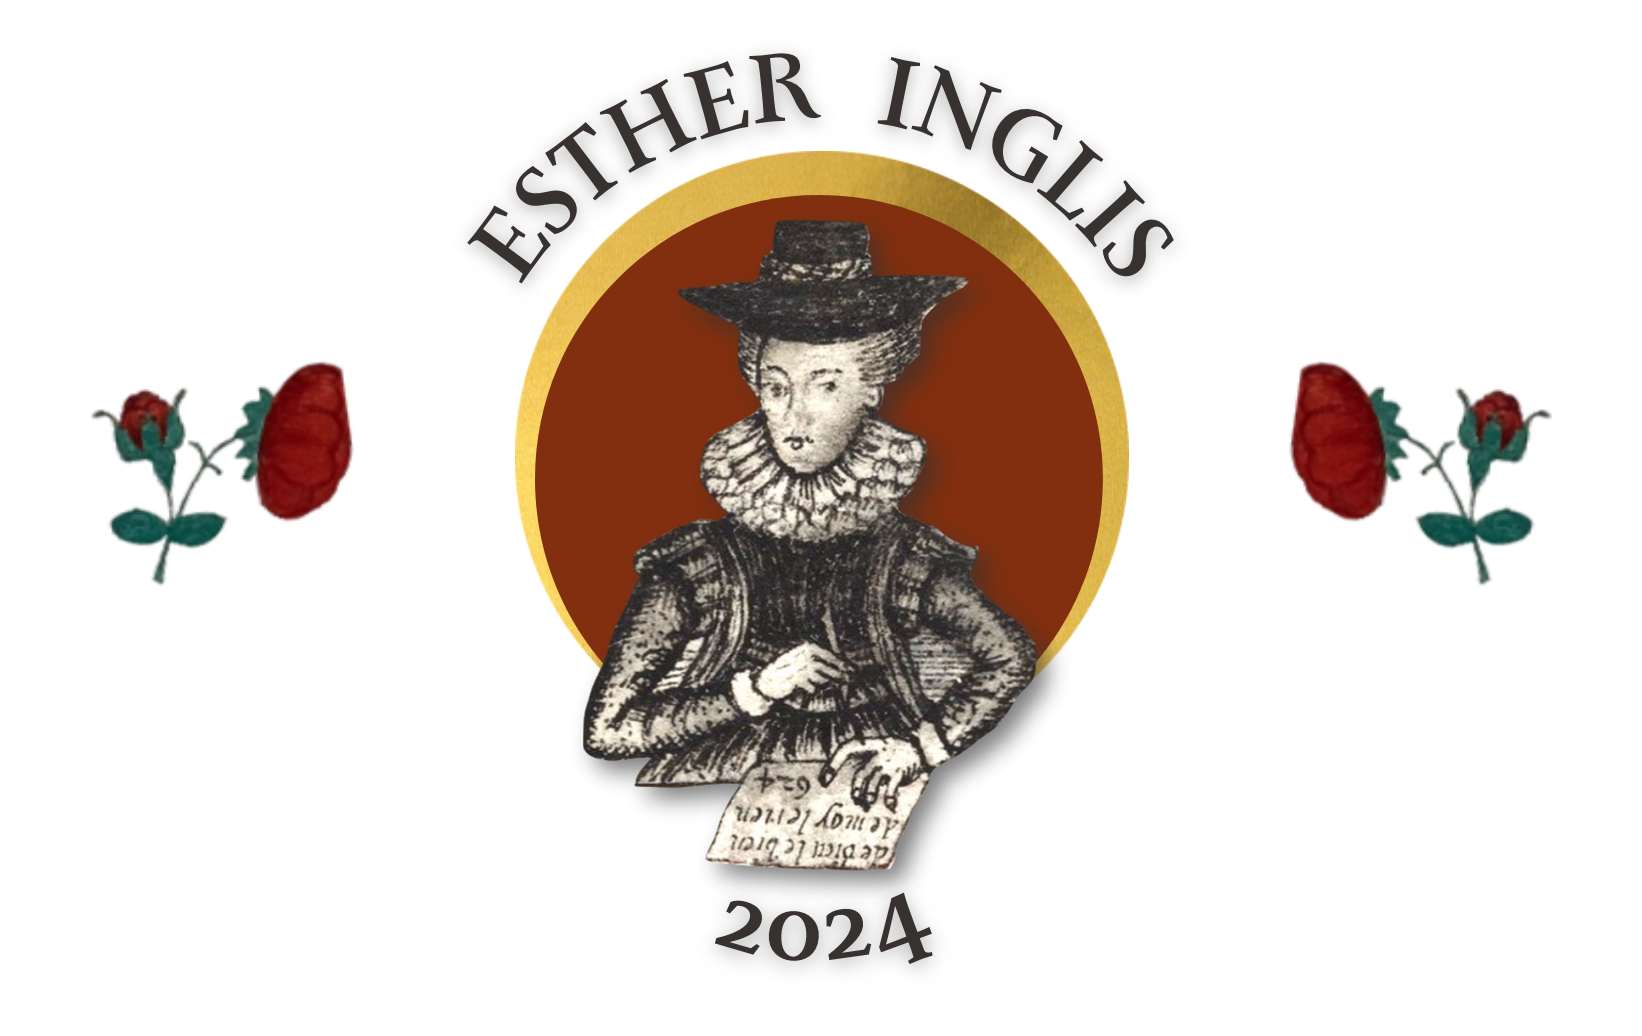 Image shows a portrait of Esther Inglis, writing on a sheet of paper, enclosed within a maroon and gold circular background shape. The words Esther Inglis 2024 are written around this central design. There is a rose and stem on either side of the logo.